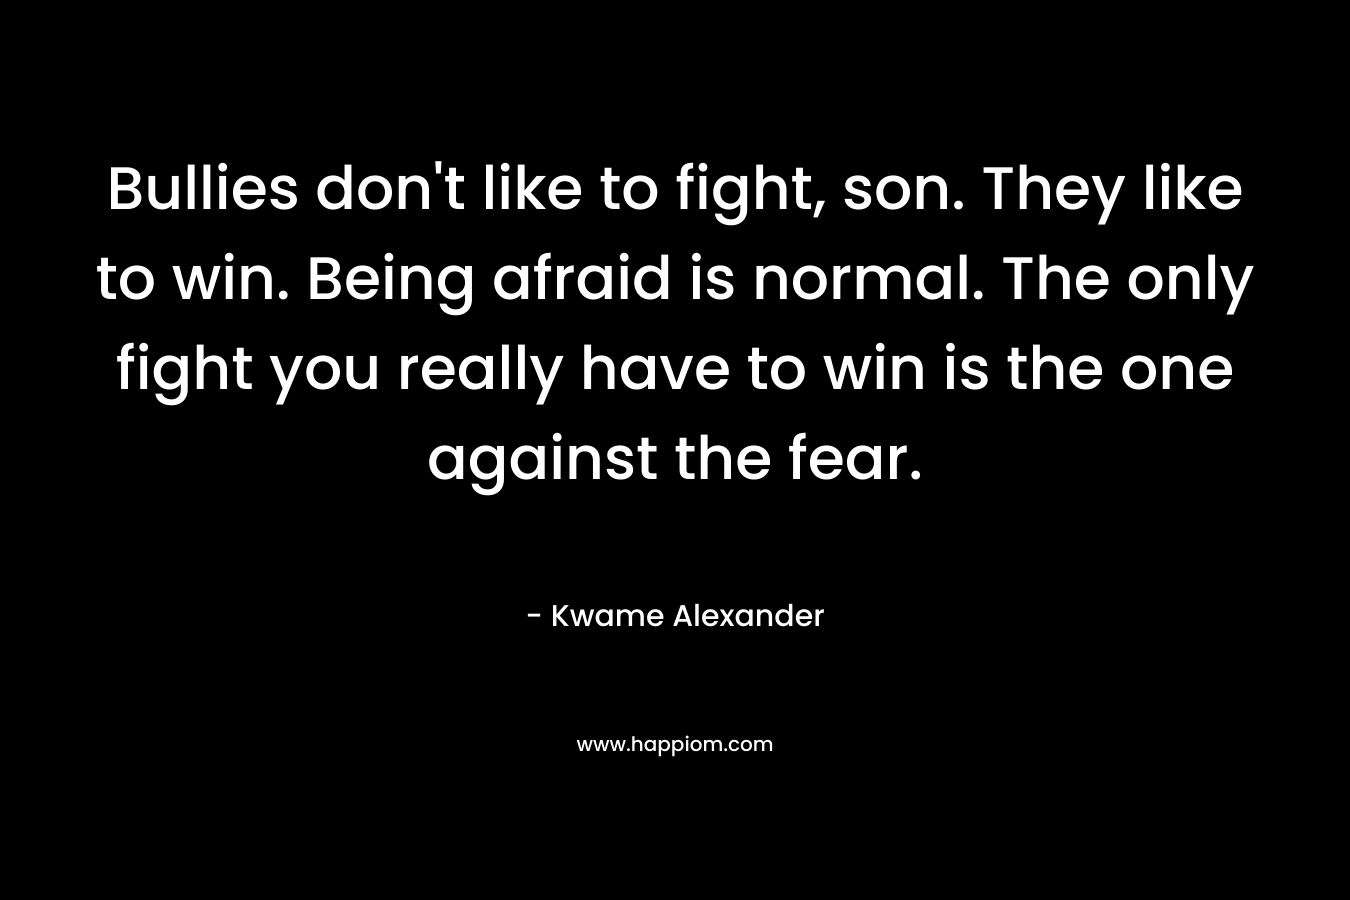 Bullies don't like to fight, son. They like to win. Being afraid is normal. The only fight you really have to win is the one against the fear.